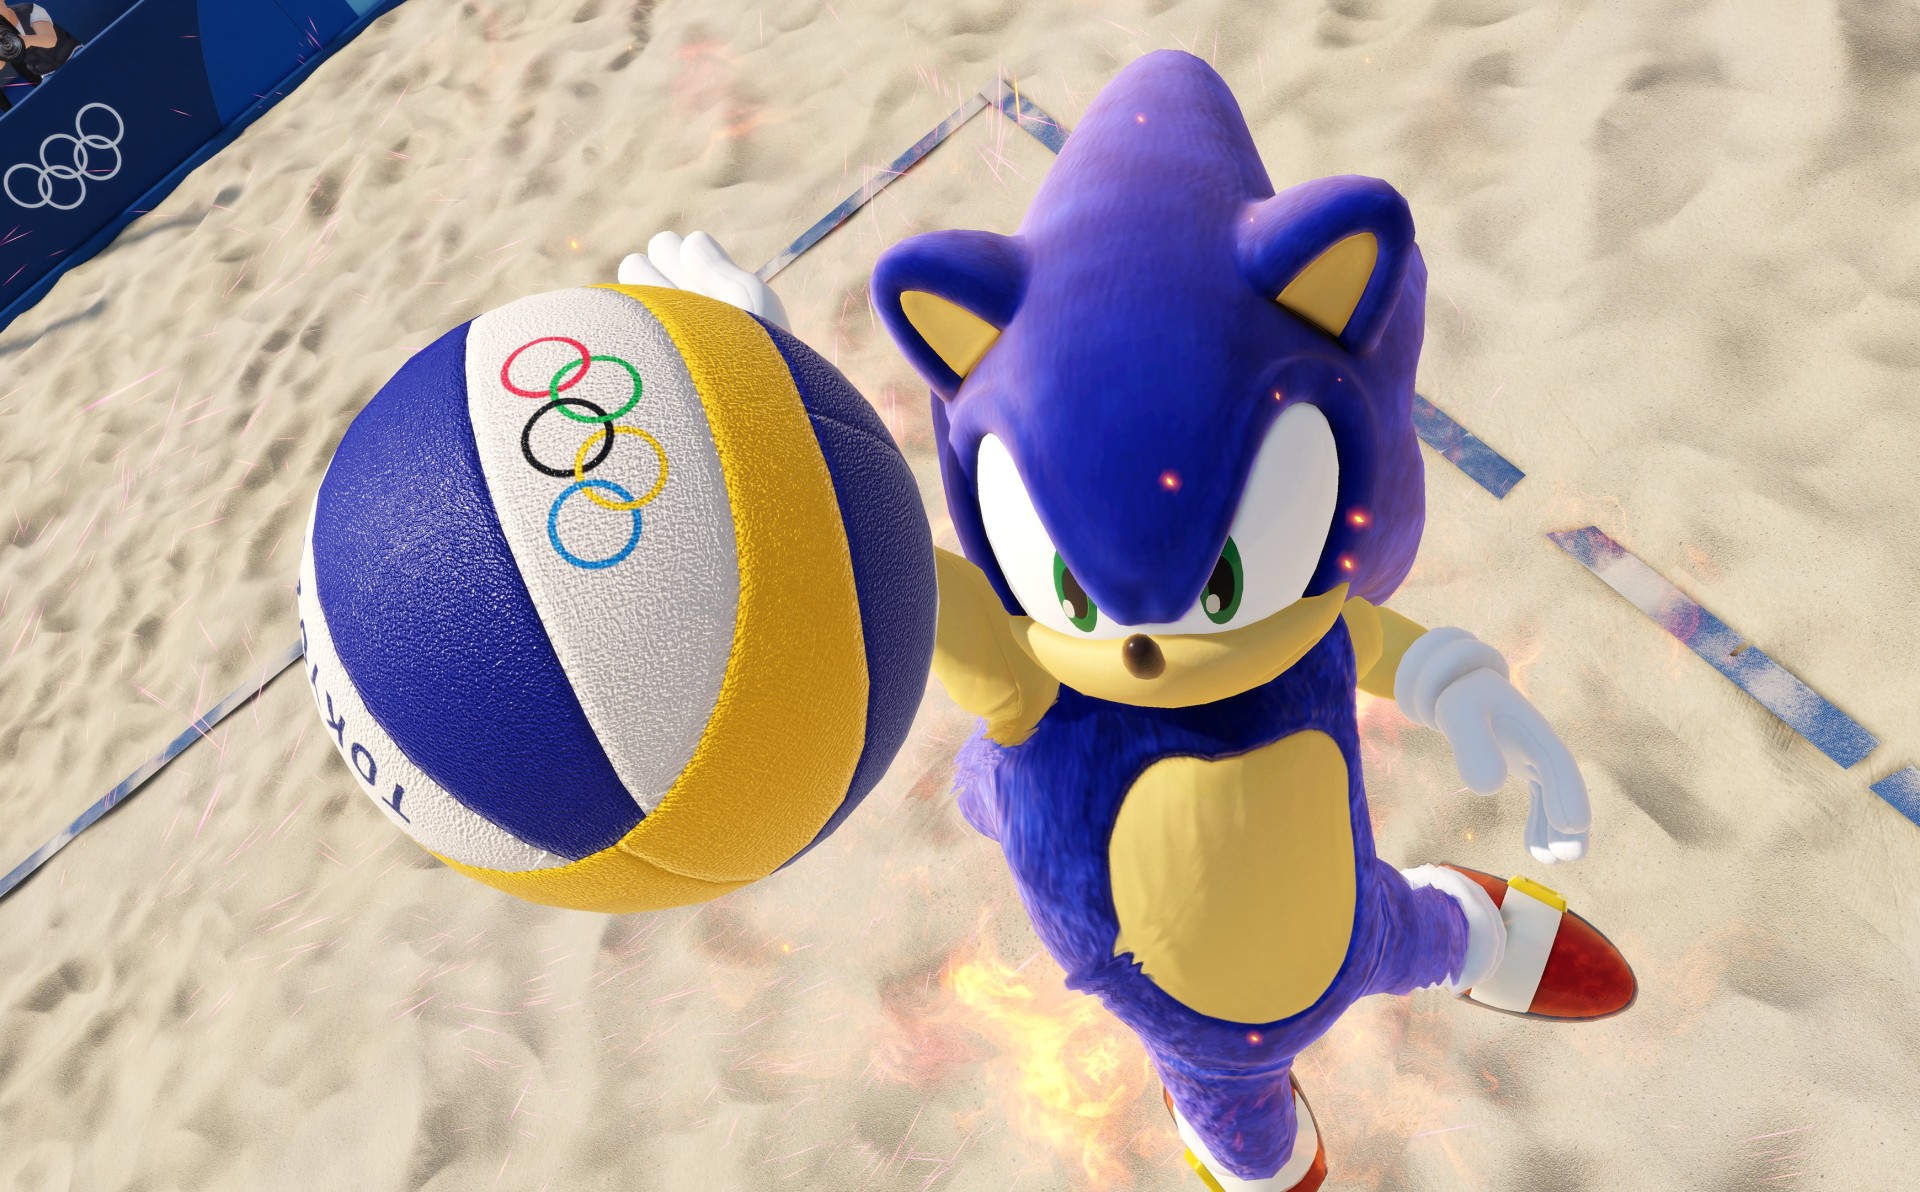 Olympic Games Tokyo 2020 – The Official Video Game – June 22